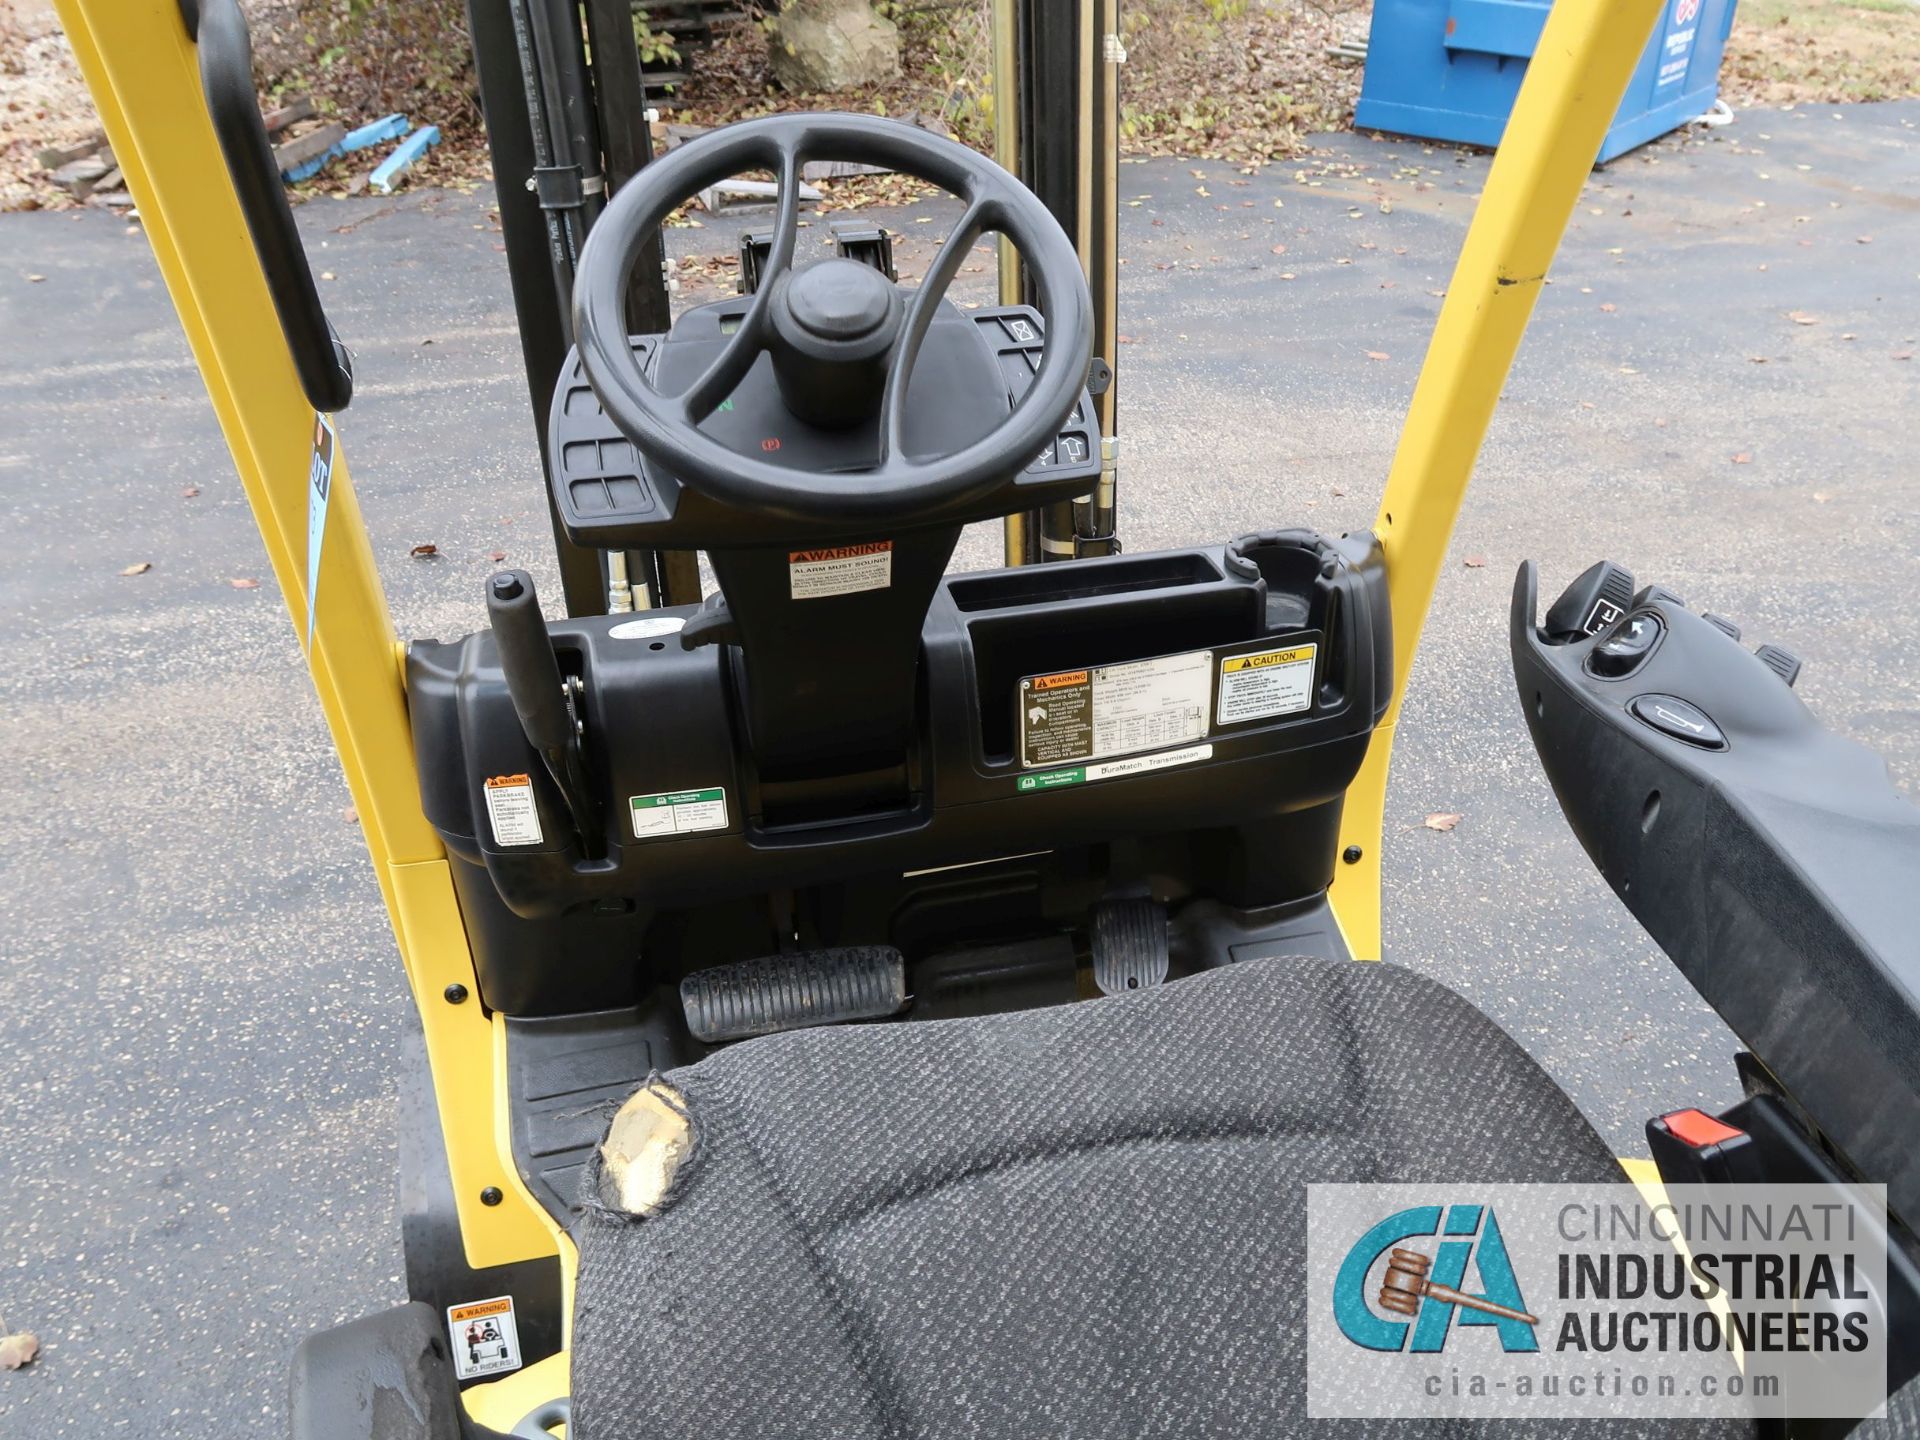 7,000 LB HYSTER MODEL S70 FT LP GAS FORKLIFT; S/N G187V02112M, 80" MAST HEIGHT, 122" MAX LIFT - Image 9 of 11